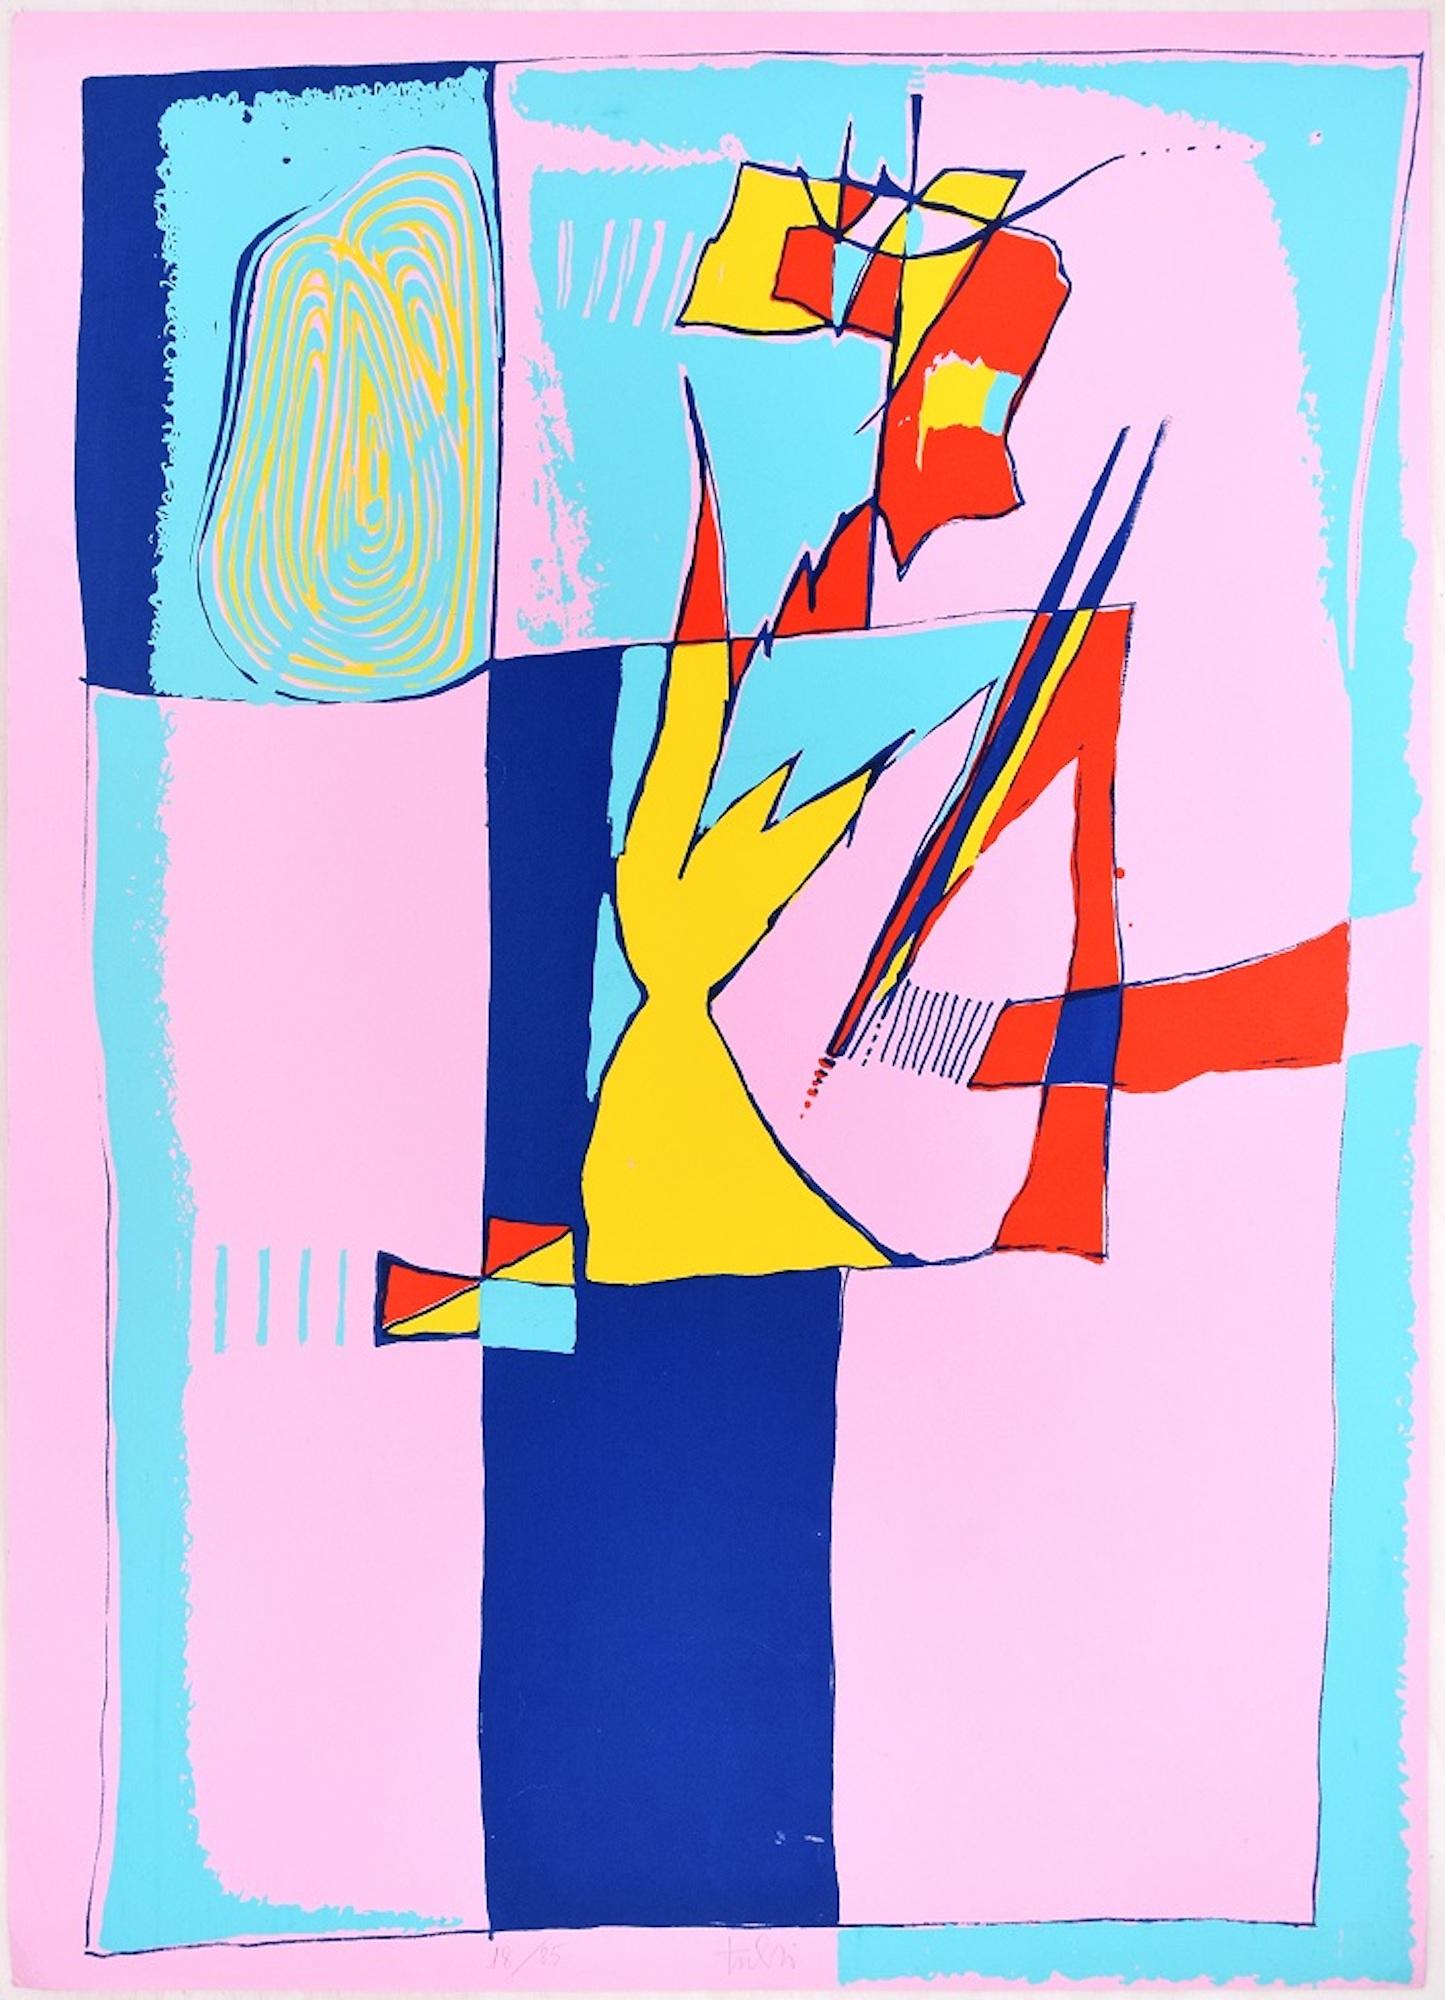 Untitled composition is a colored serigraph on  a pink colored paper, realized in the Seventies of XX century by the Italian artist, Wladimiro Tulli, published by La Nuova Foglio, a publishing house of Macerata as the dry-stamp reports on lower